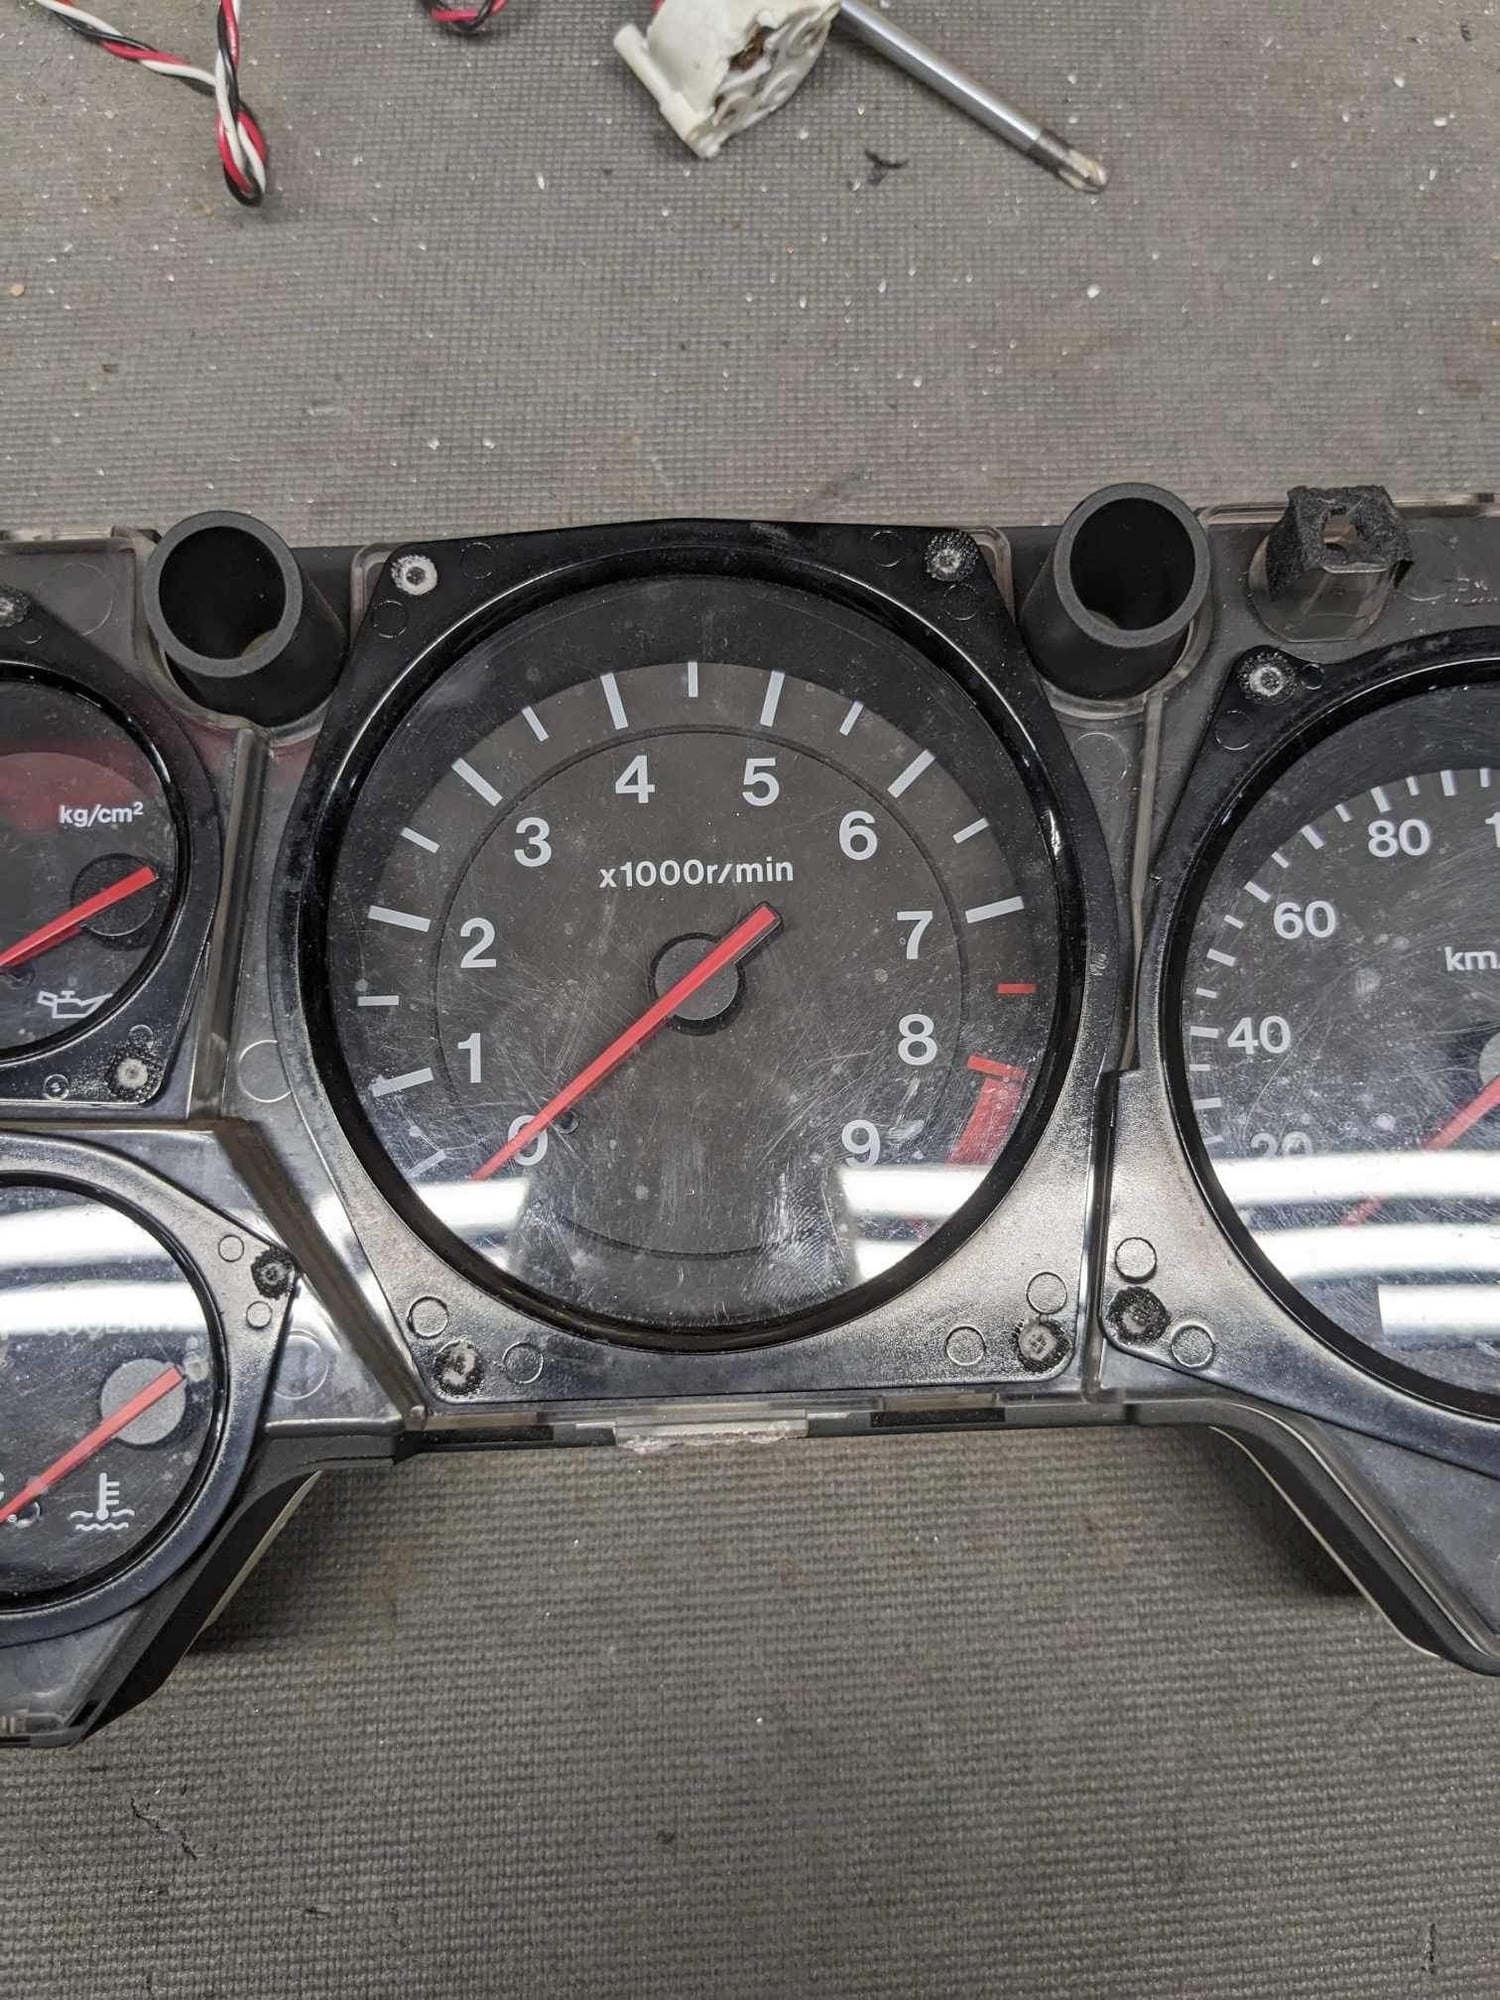 Interior/Upholstery - Refurbished FD Instrument Clusters (JDM and 99 spec) - Used - 1992 to 2002 Mazda RX-7 - London HA27DY, United Kingdom